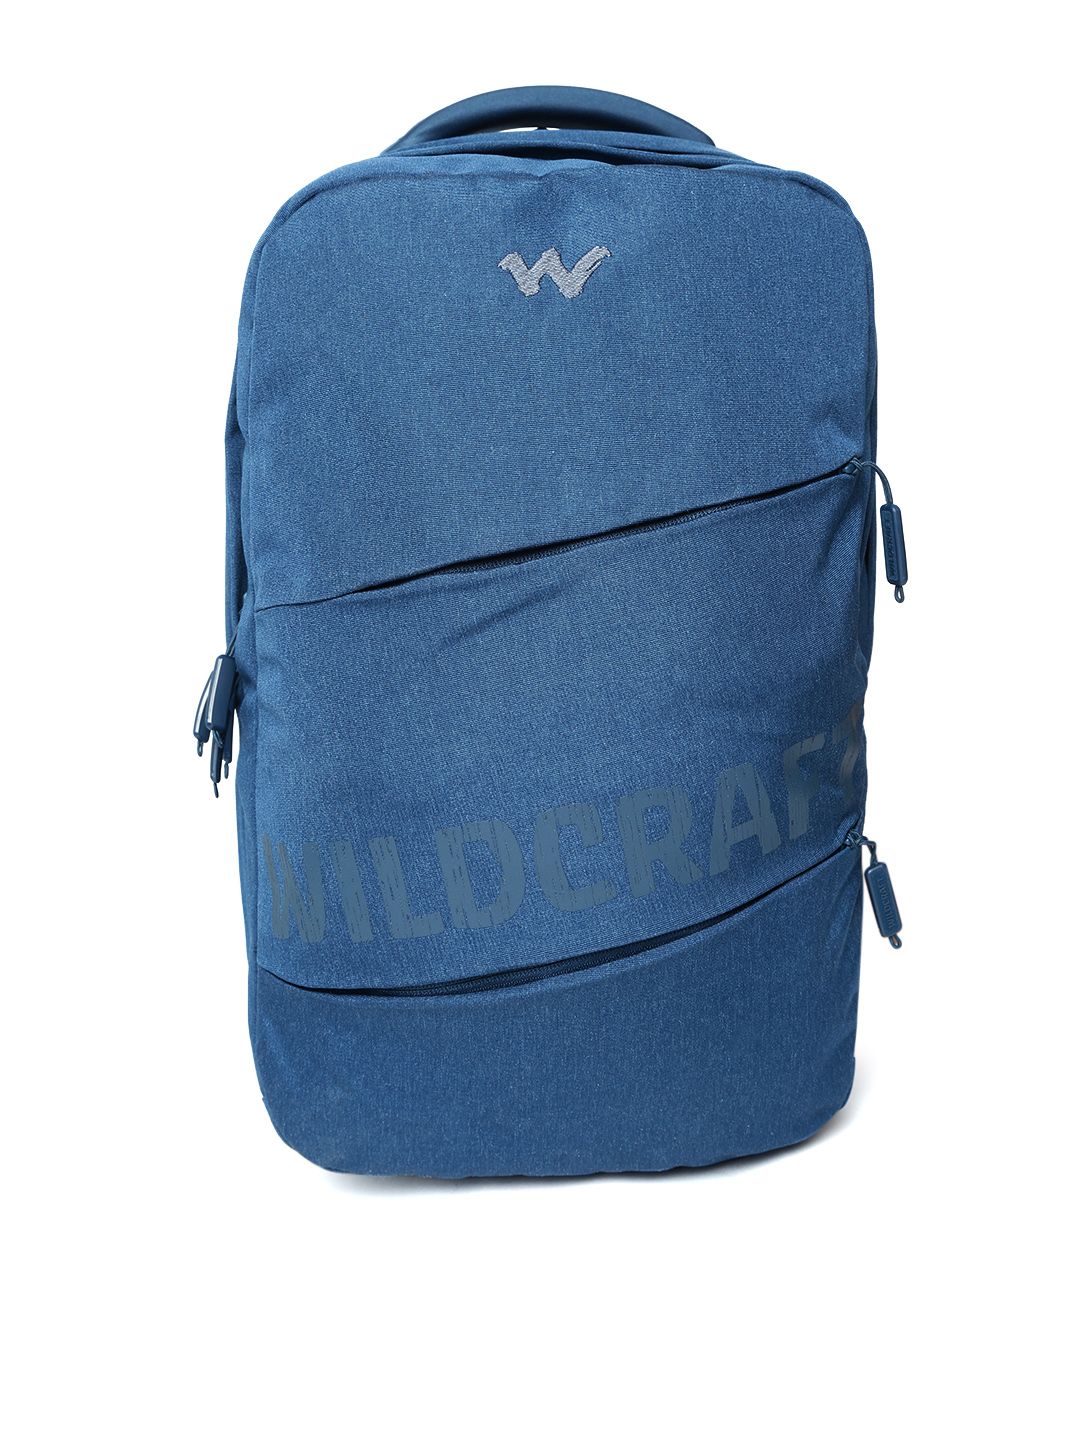 Wildcraft Unisex Navy Blue Solid Laptop Backpack Price in India